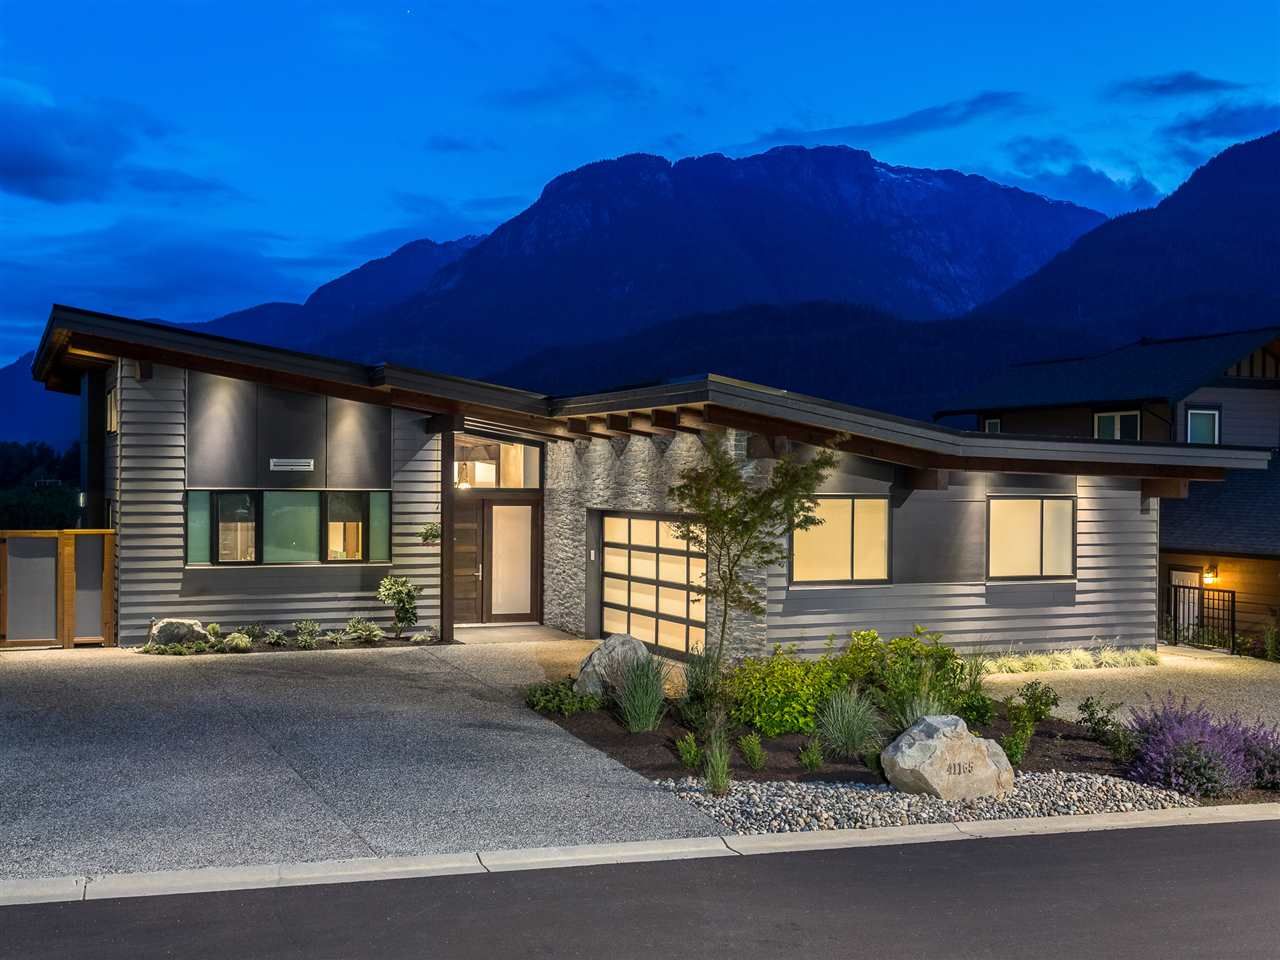 Main Photo: 41165 ROCKRIDGE Place in Squamish: Tantalus House for sale : MLS®# R2167179